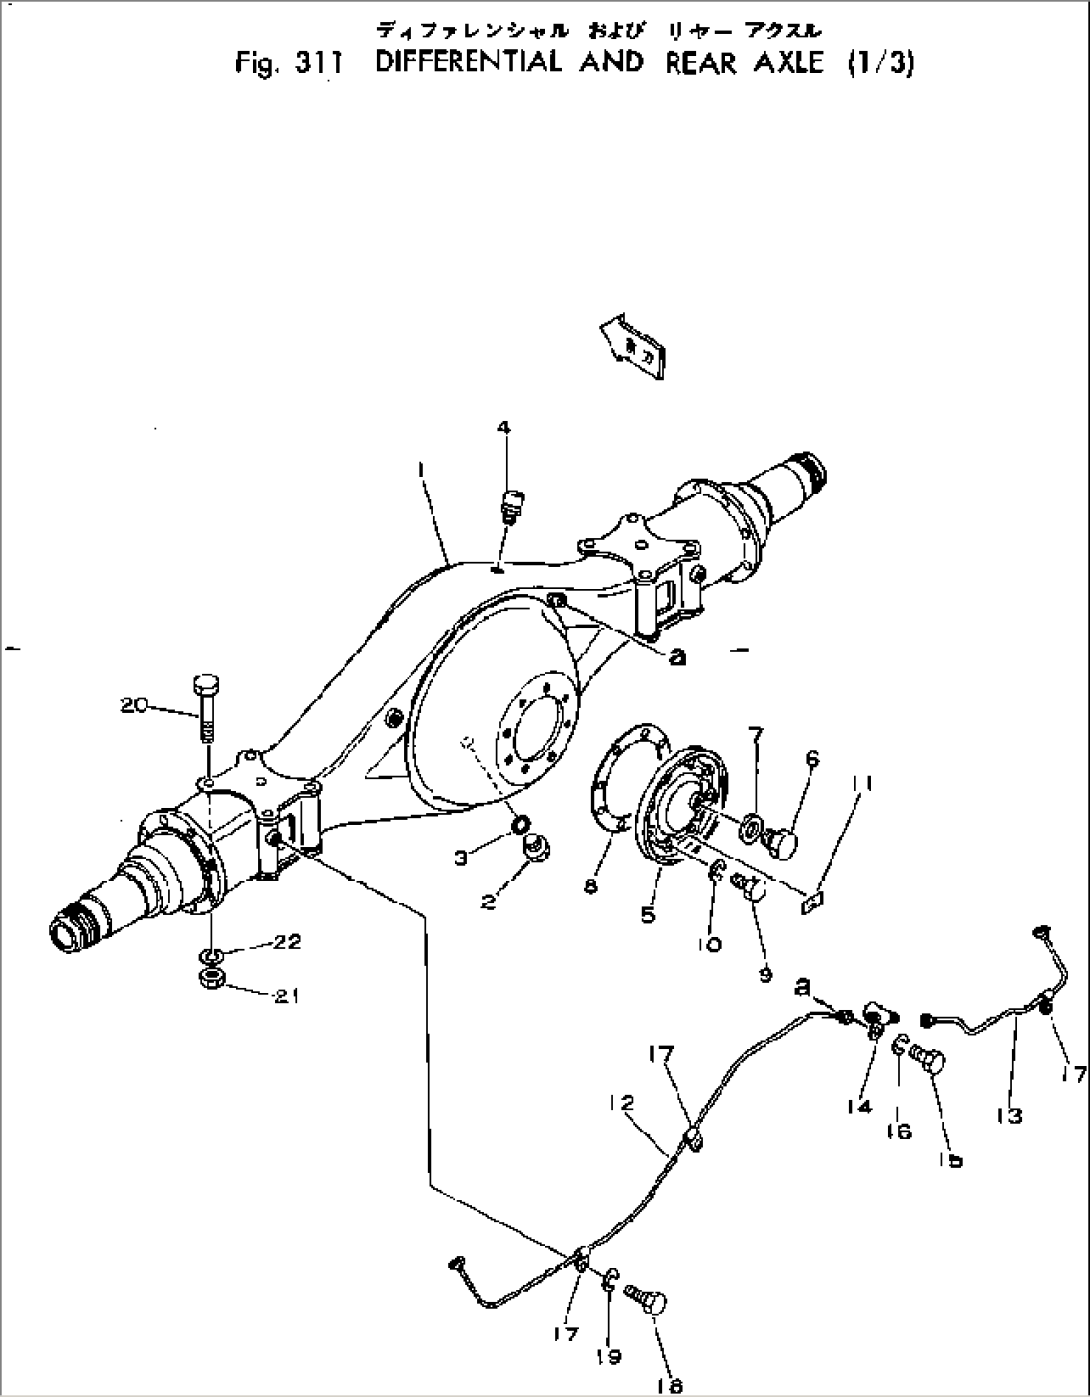 DIFFERENTIAL AND REAR AXLE (1/3)